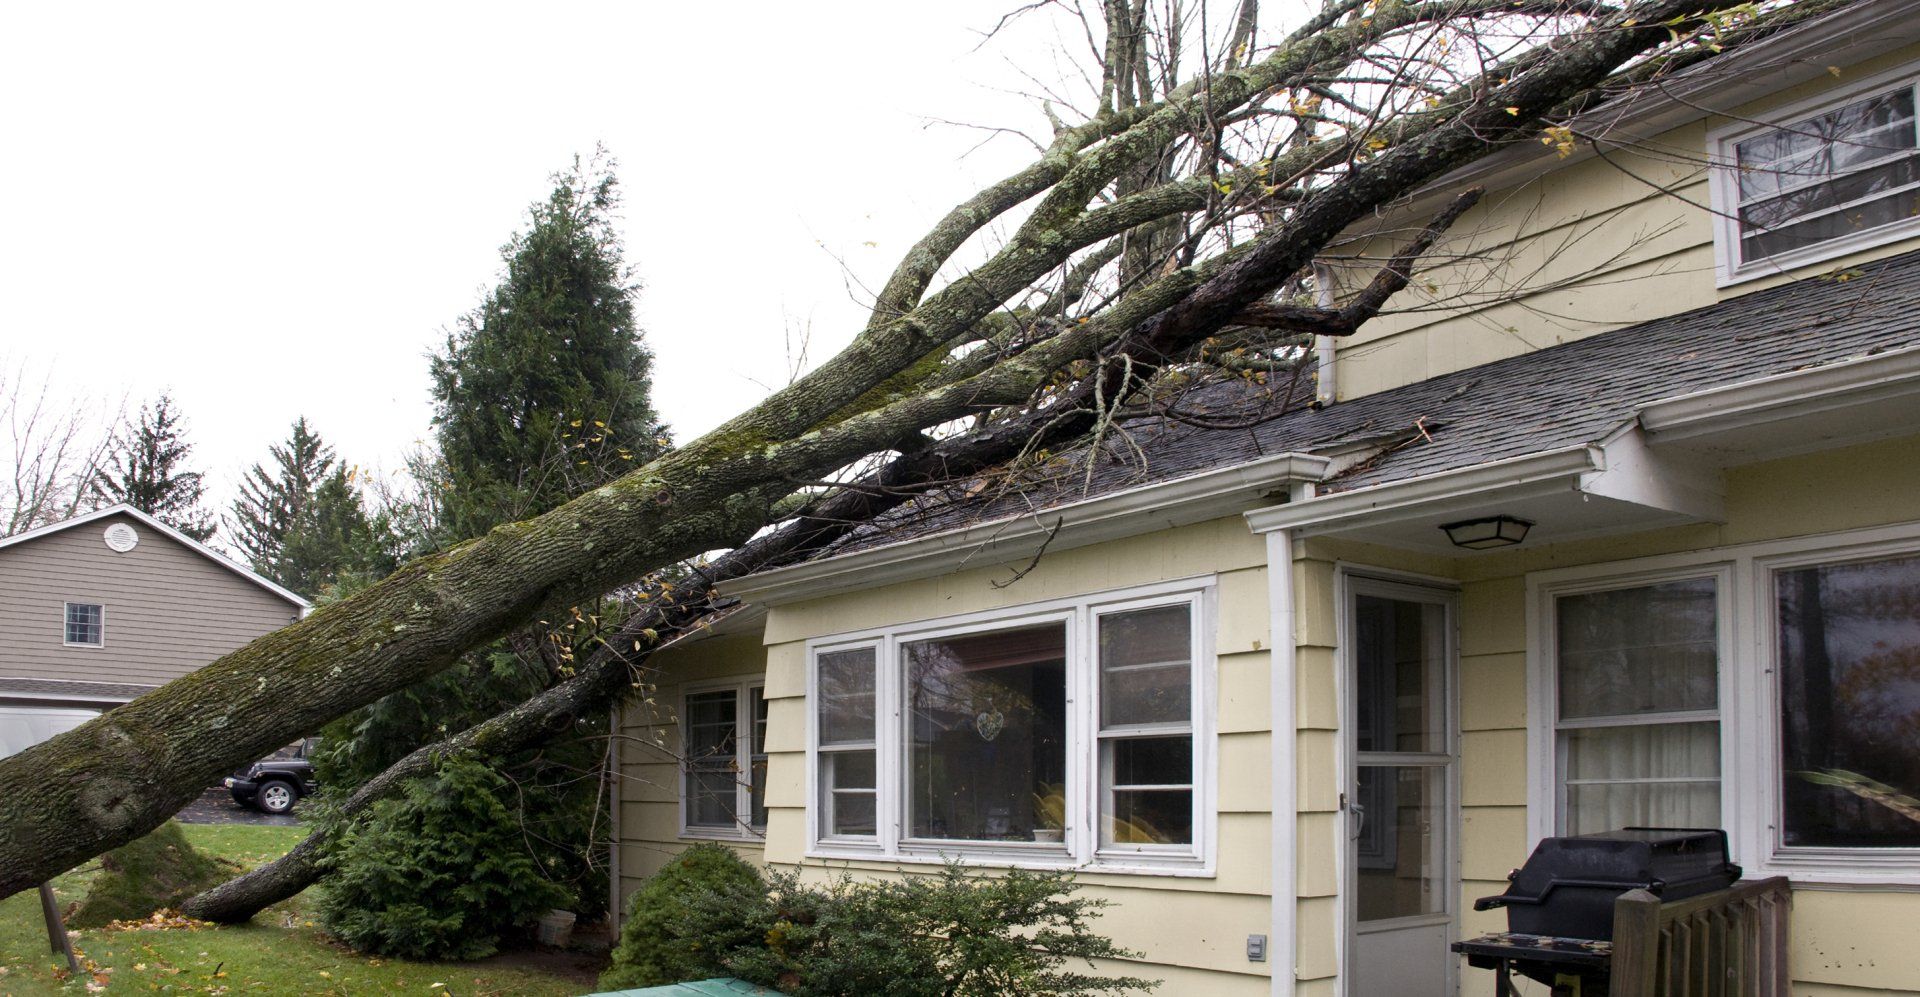 How a Structural Engineer Can Assess Wind, Water, & Snow Damage After a Storm